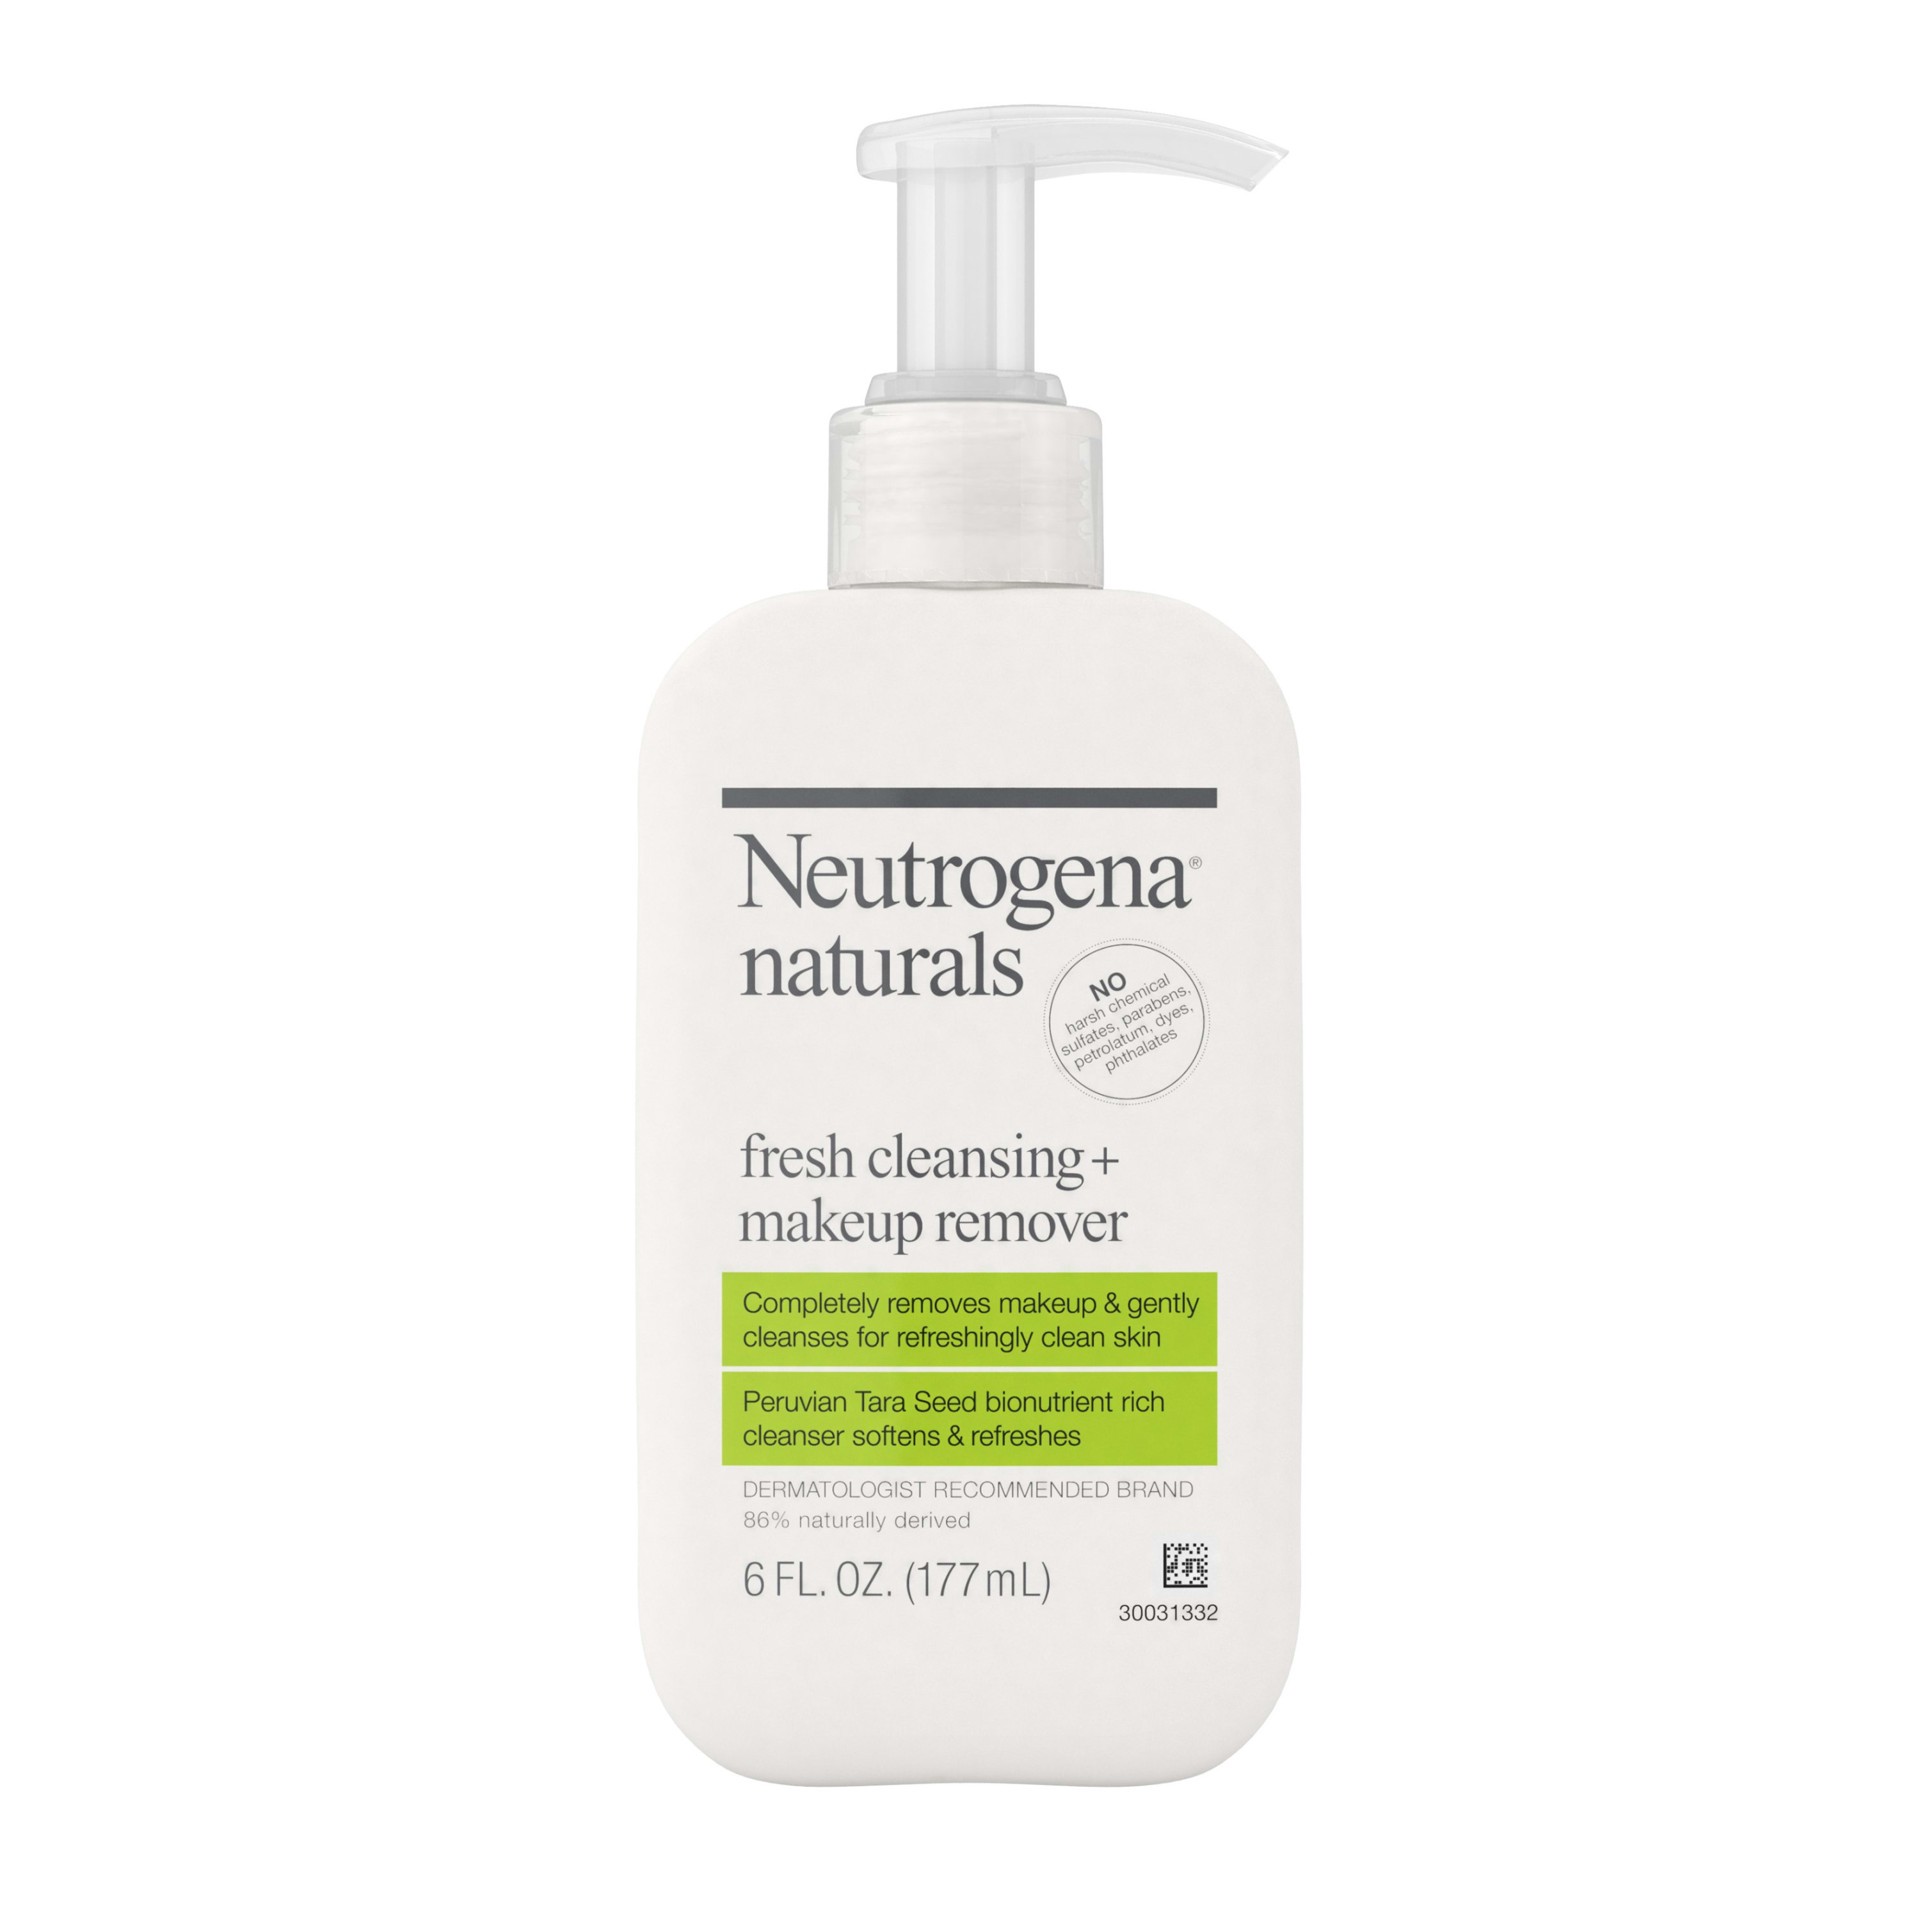 slide 1 of 5, Neutrogena Naturals Fresh Cleansing Daily Face Wash + Makeup Remover with Naturally-Derived Peruvian Tara Seed, Hypoallergenic, Non-Comedogenic & Sulfate-, Paraben- & Phthalate-Free, 6 fl. oz, 6 fl oz